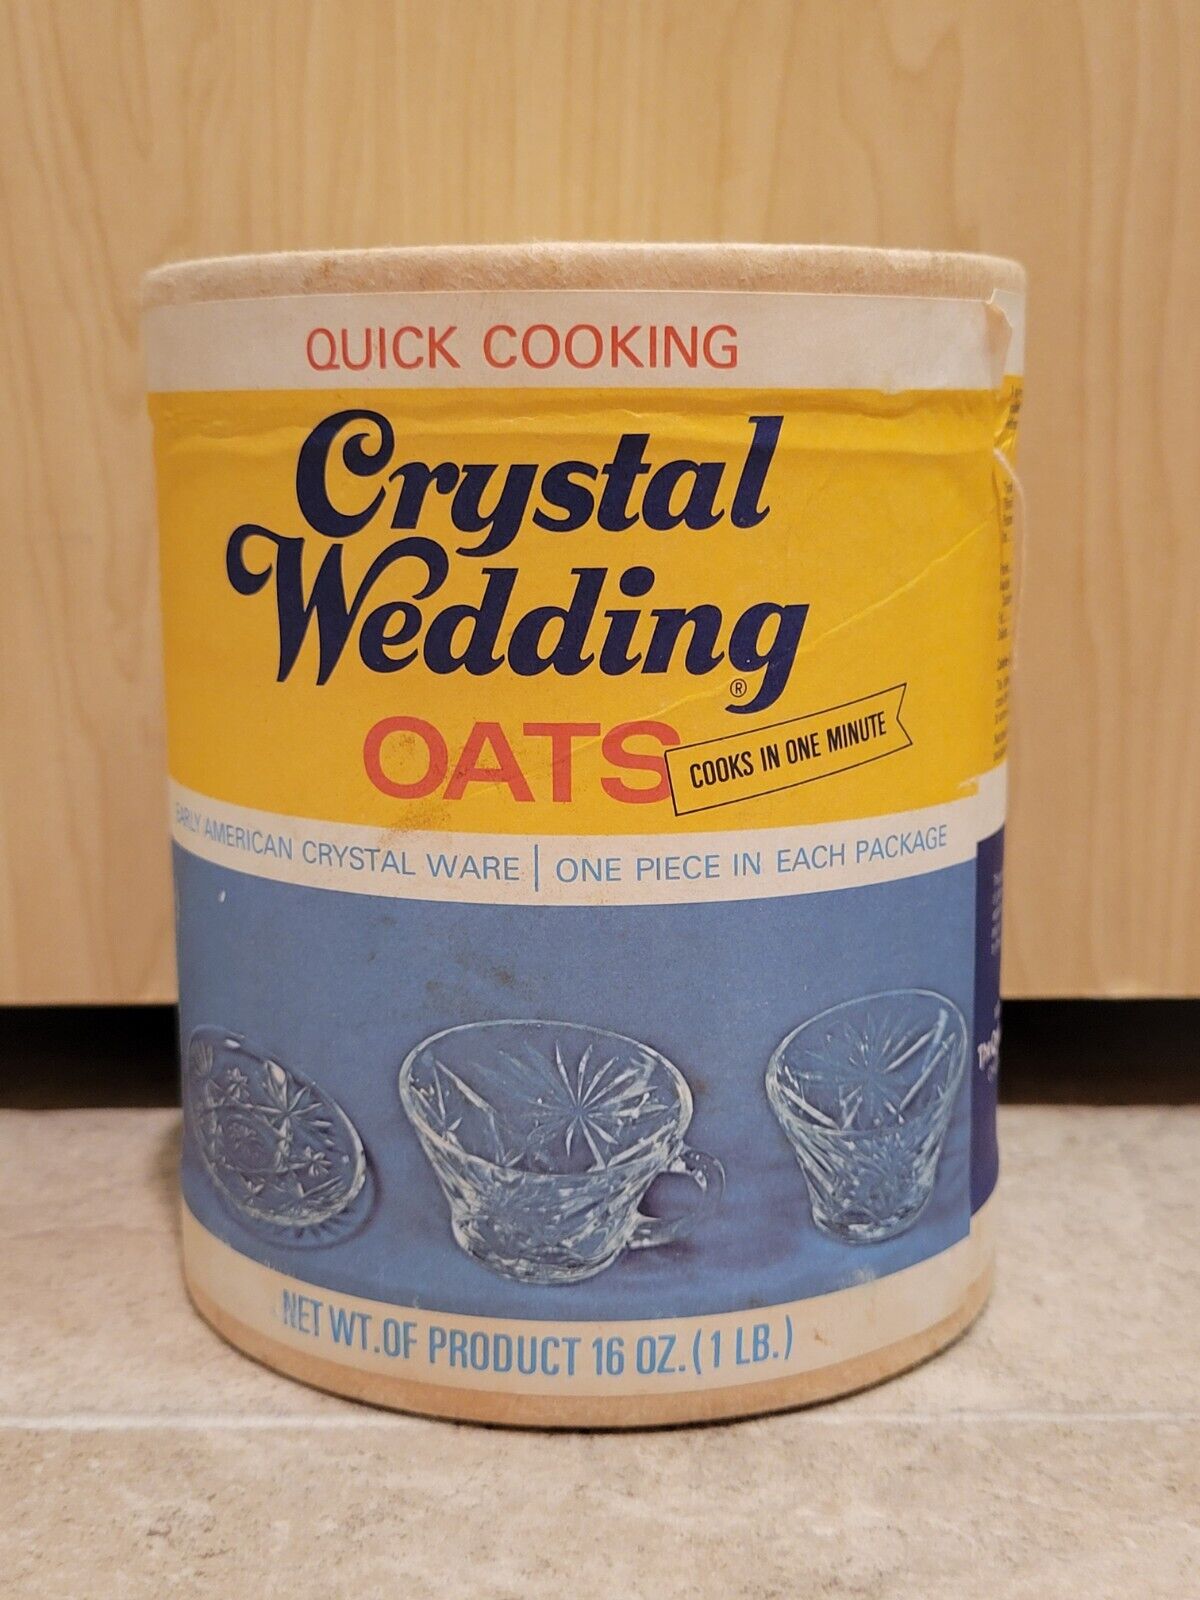 Vtg Crystal Wedding Oats Early American Crystal Ware Sealed Nos Quaker Oats Co.